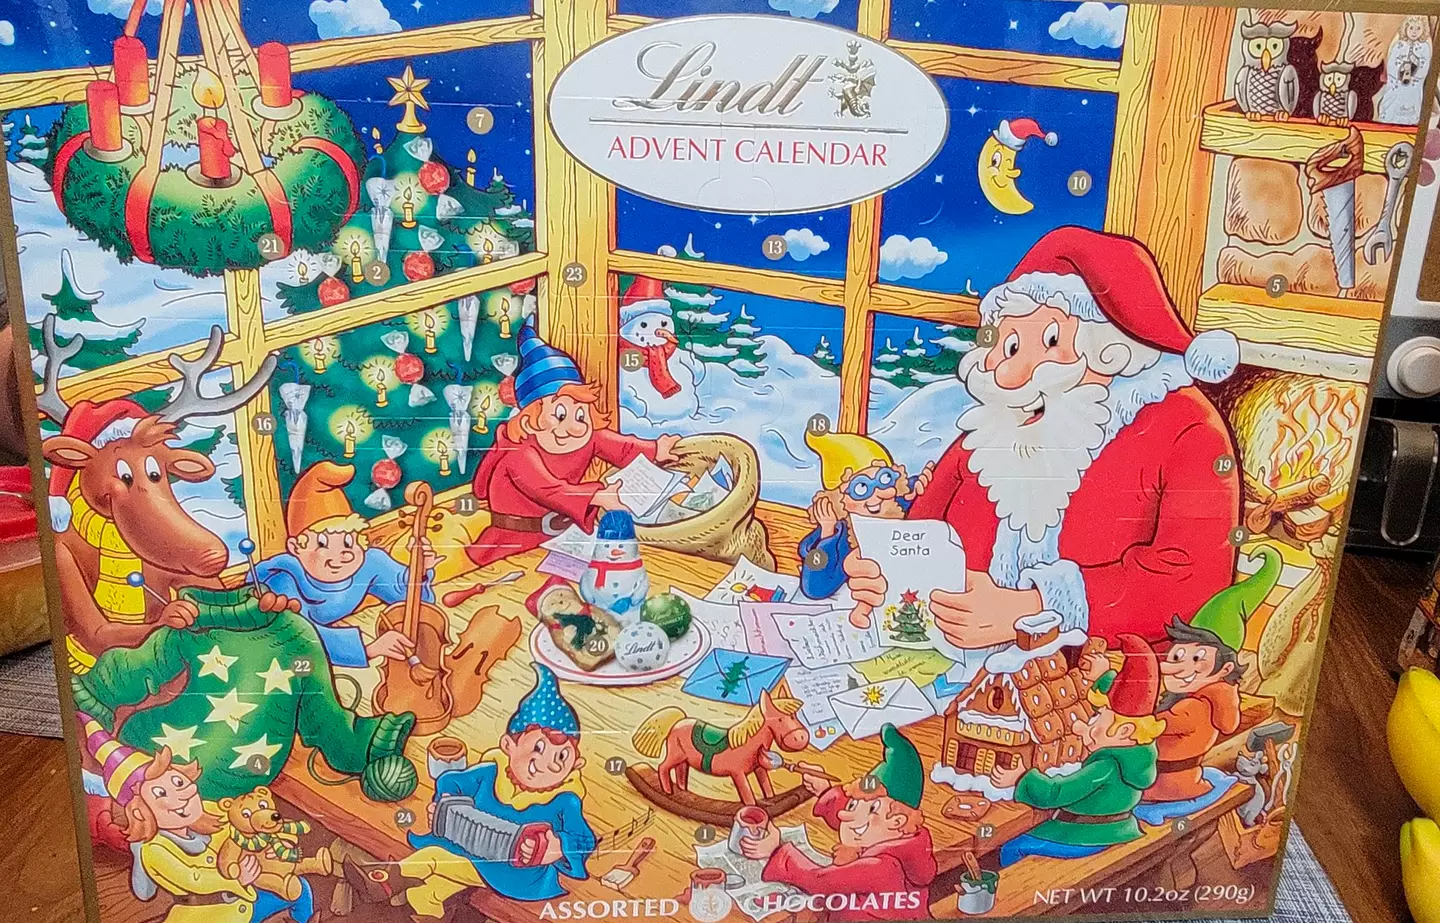 There are two major theories why some advent calendars only go up to the 24 December.